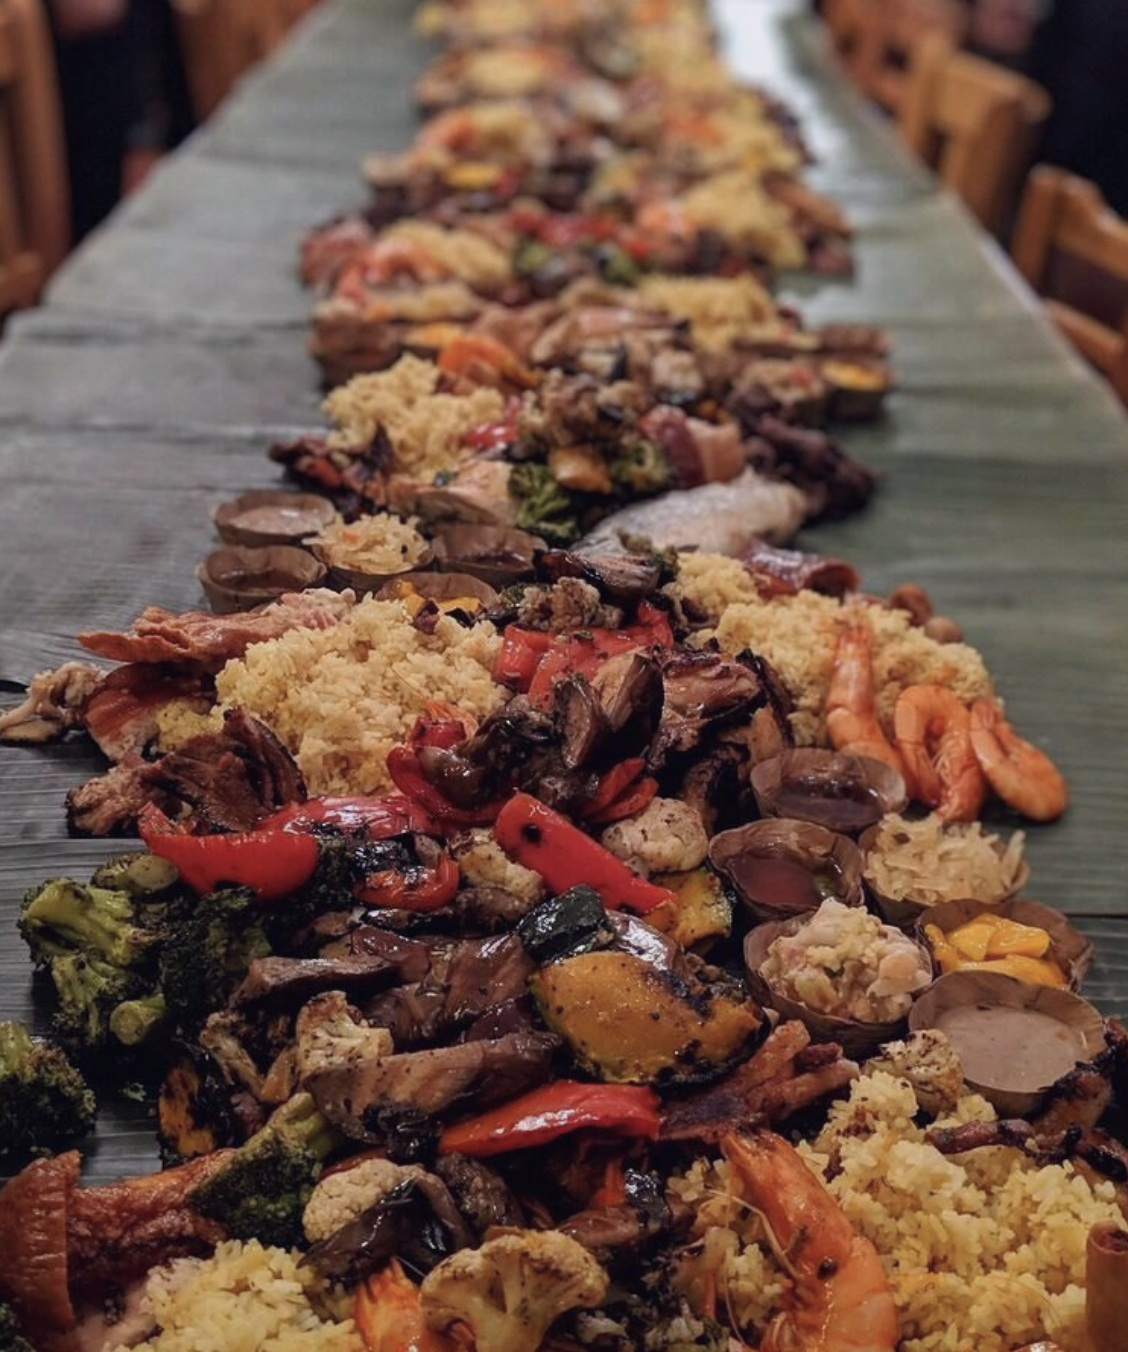 Their Kamayan feast laid out on a table